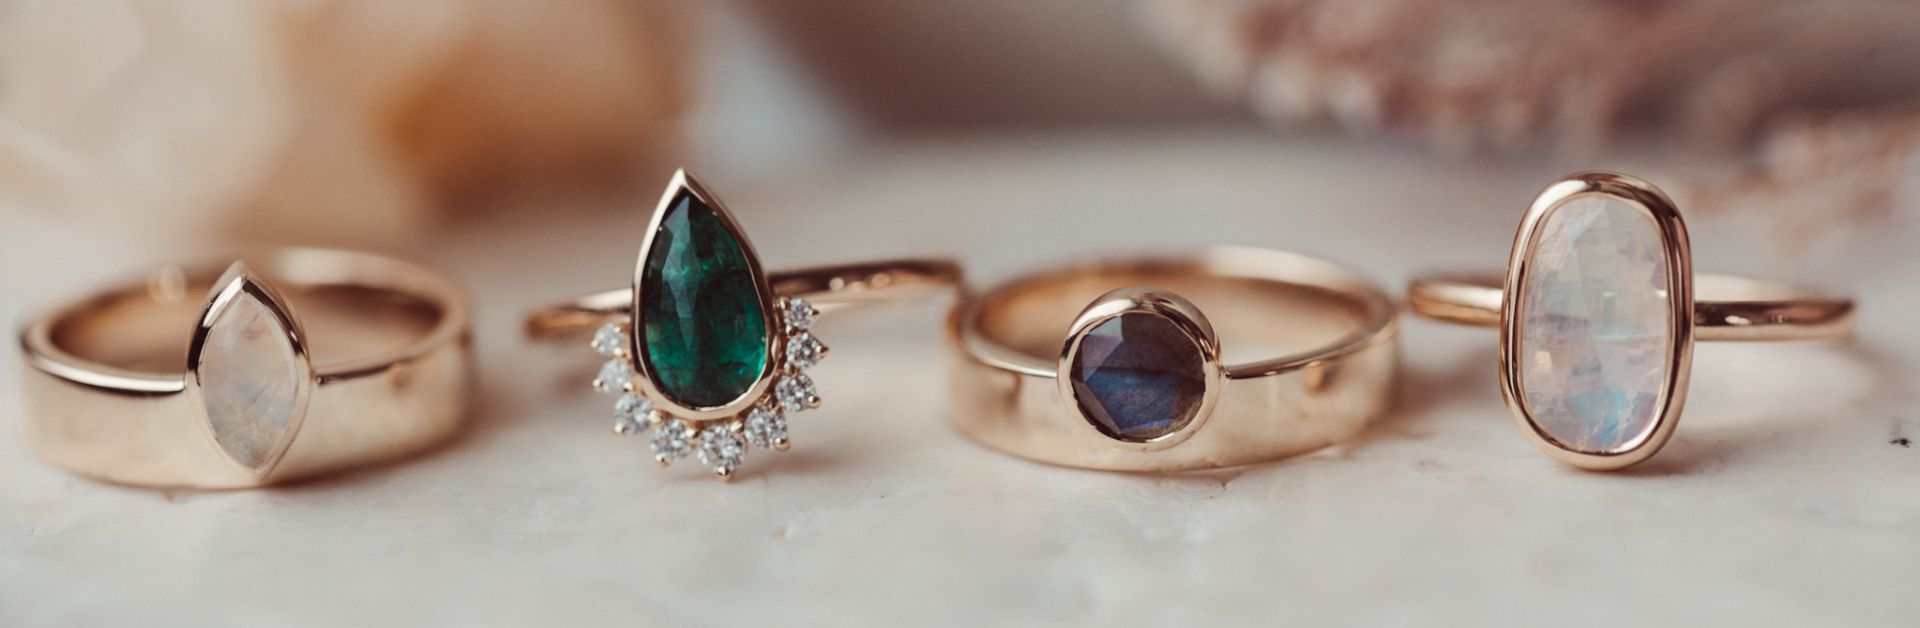 Selecting the right Gemstone for your dream Engagement Ring